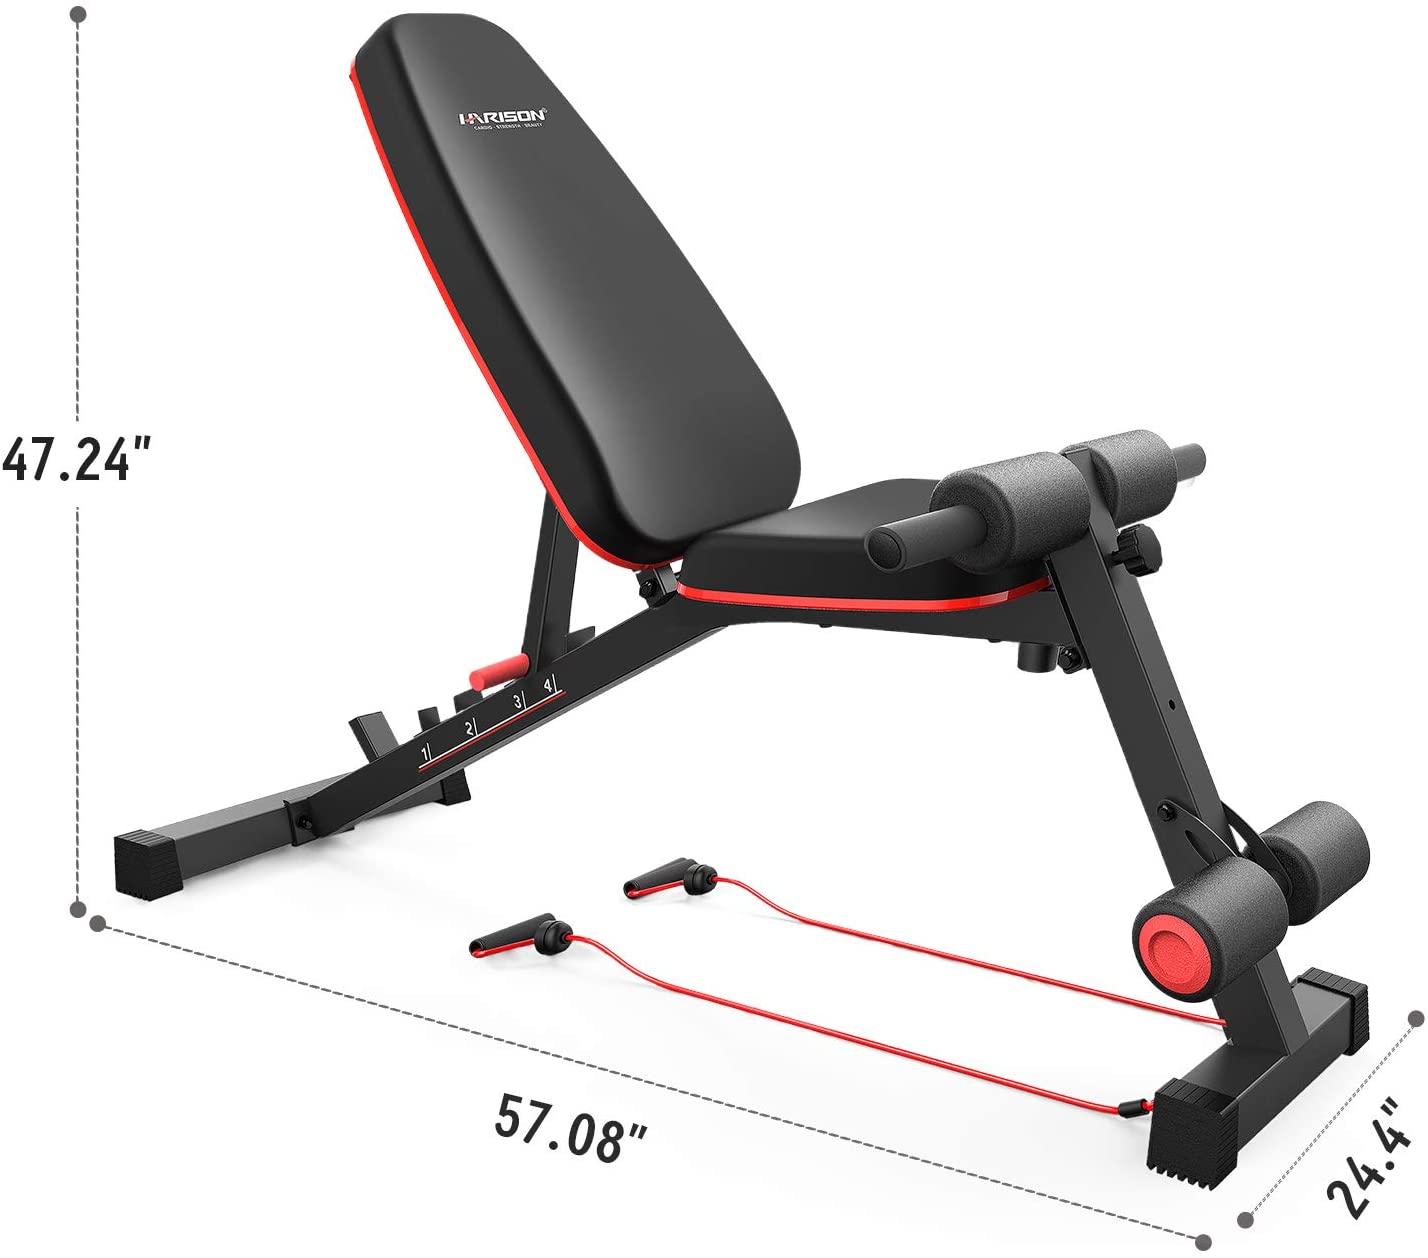 HARISON Weight Bench Adjustable, Utility Exercise Workout Bench for Home, Gym, Strength Training, Multi-Purpose Folding Flat Incline and Decline Bench Press - image 2 of 7